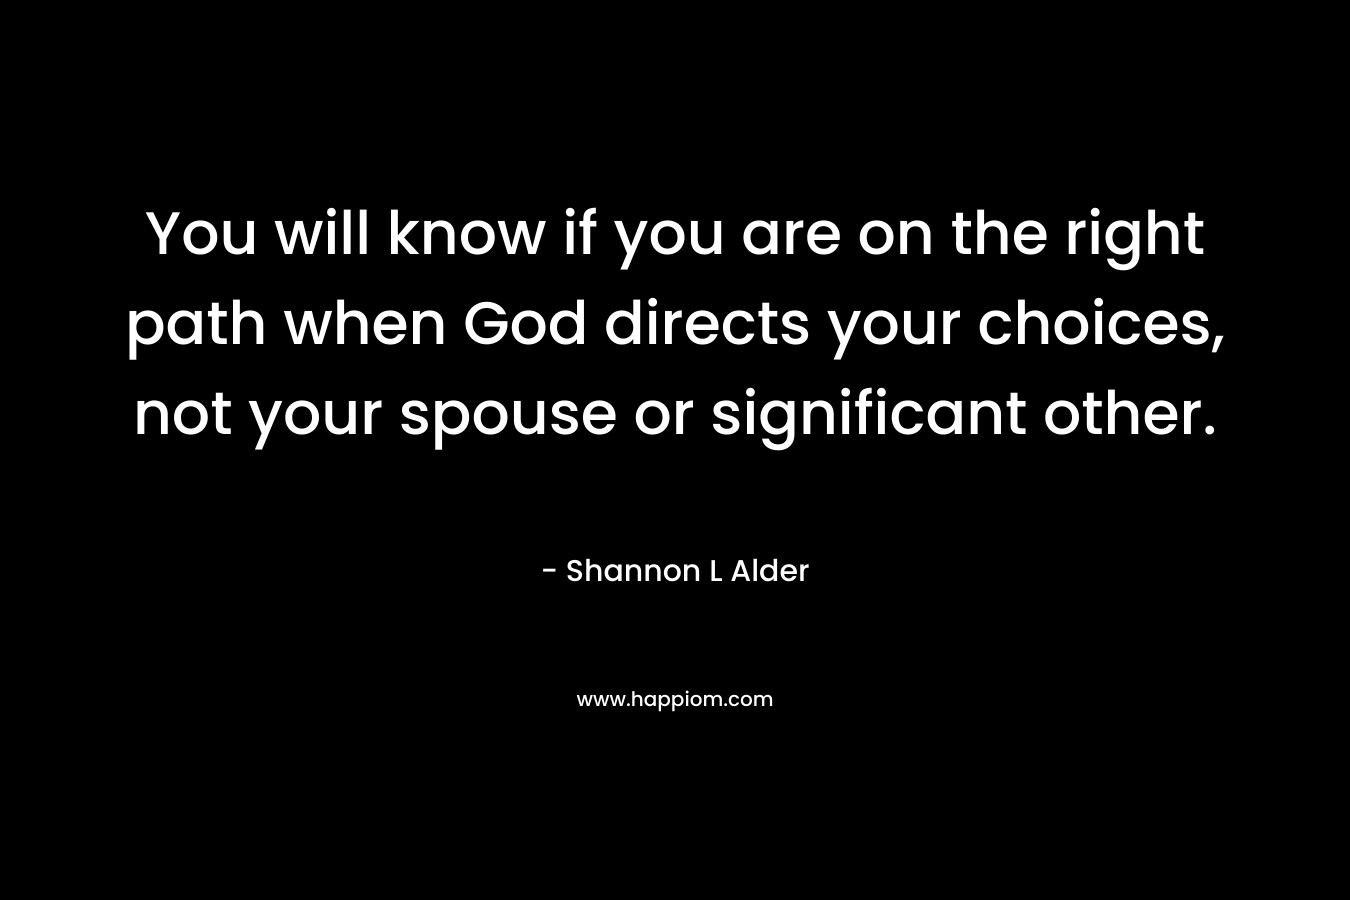 You will know if you are on the right path when God directs your choices, not your spouse or significant other.